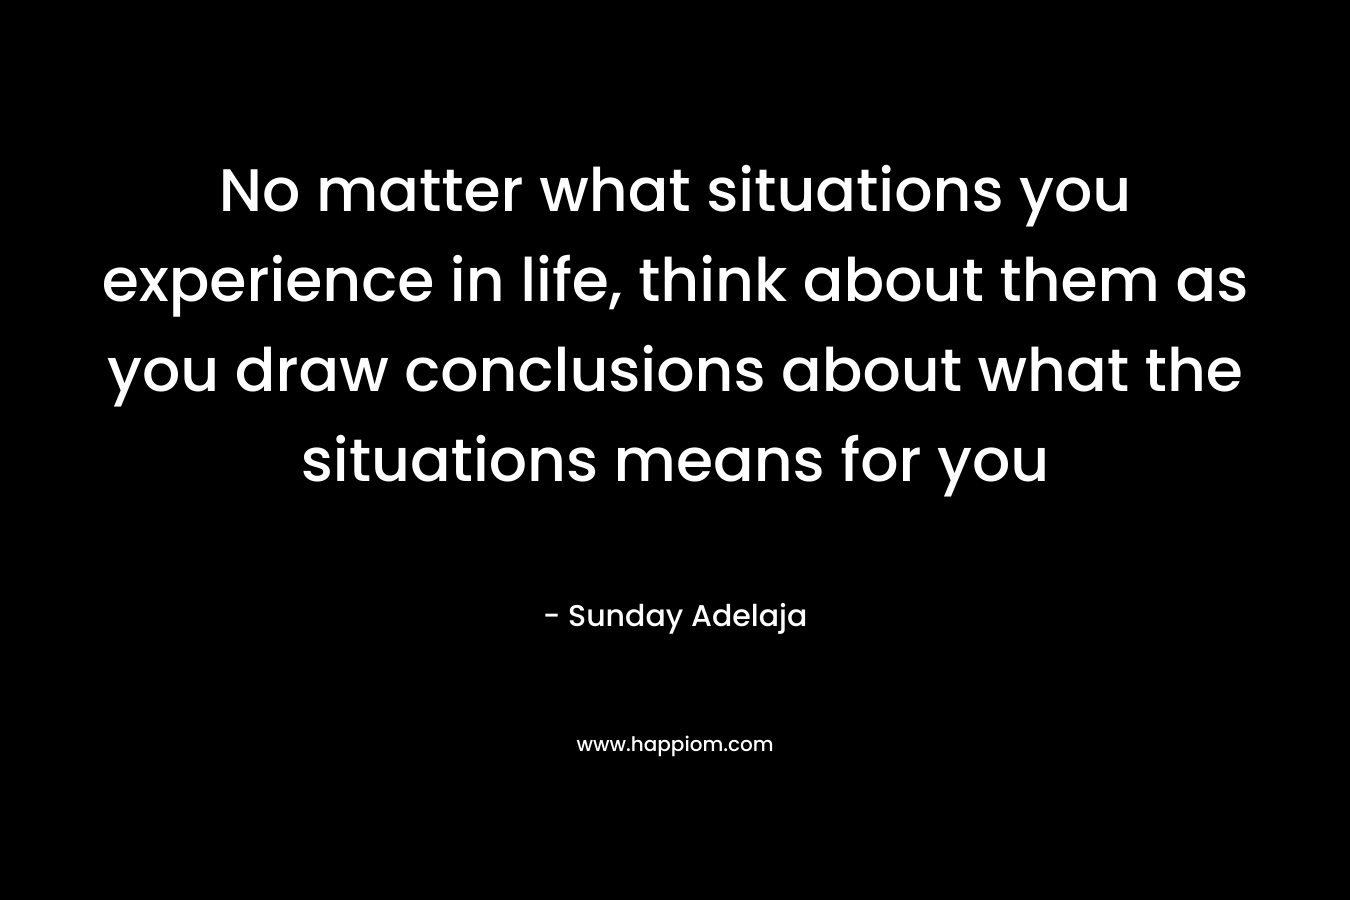 No matter what situations you experience in life, think about them as you draw conclusions about what the situations means for you